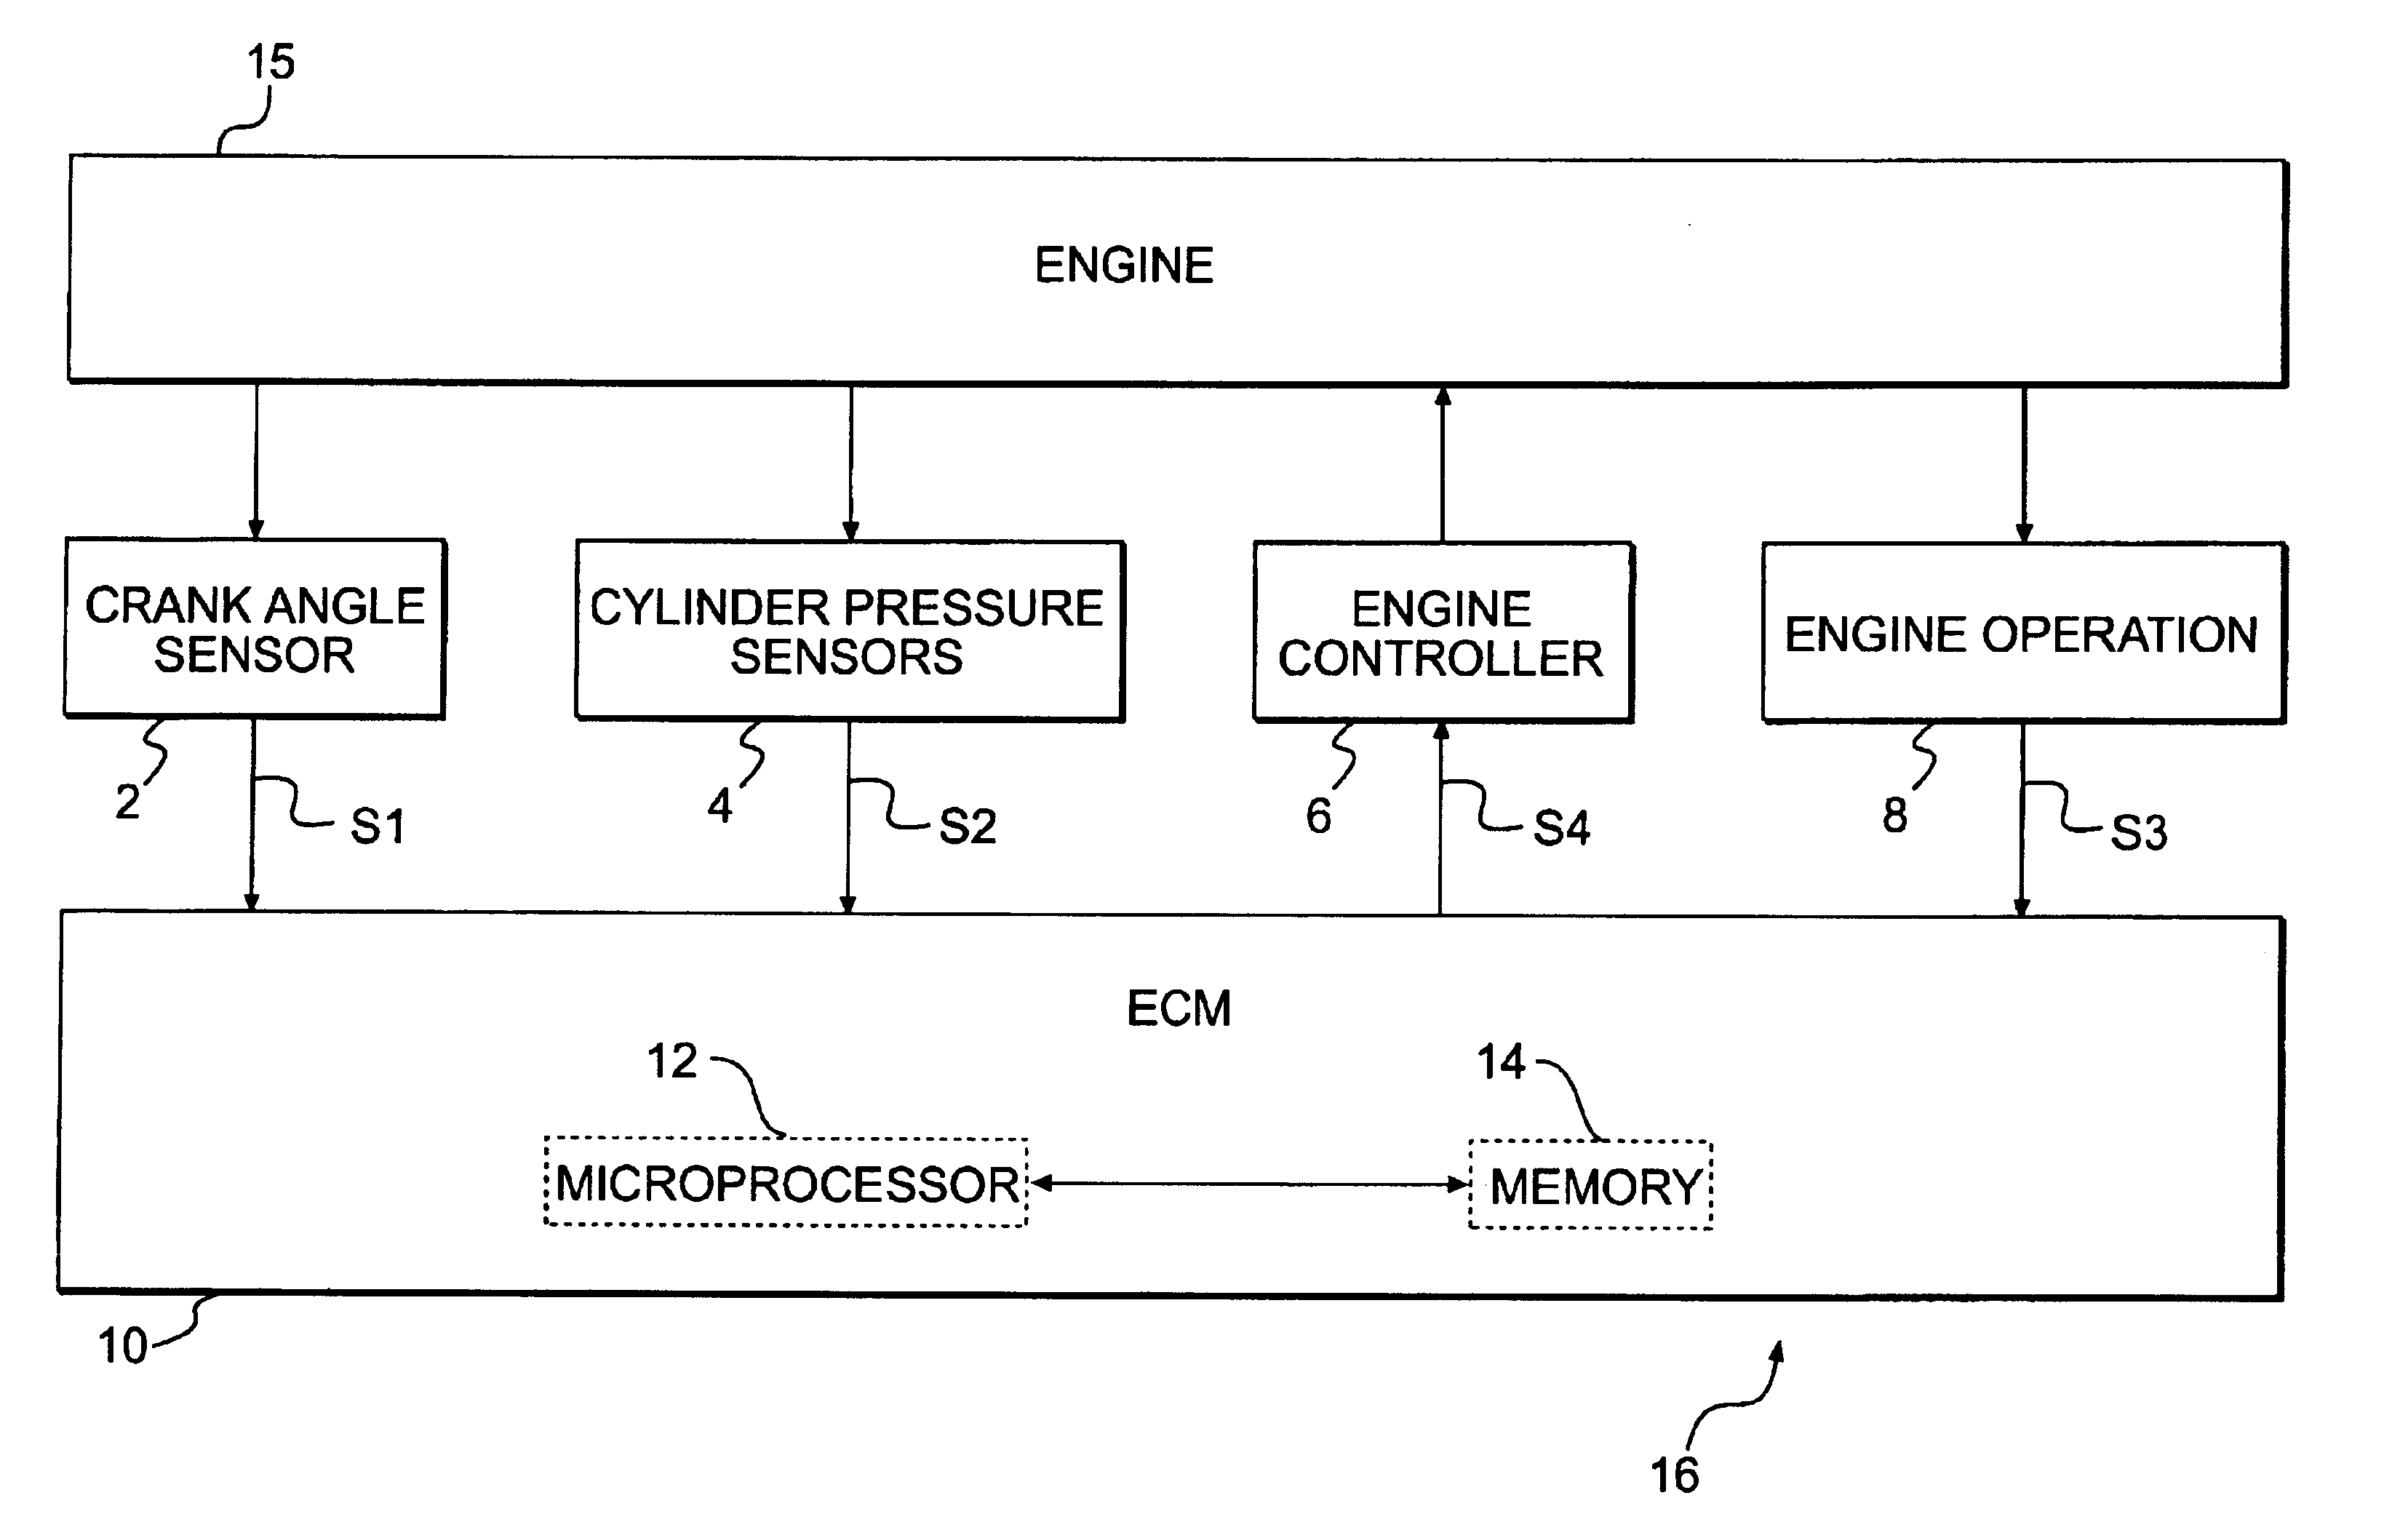 System and method for diagnosing and calibrating internal combustion engines